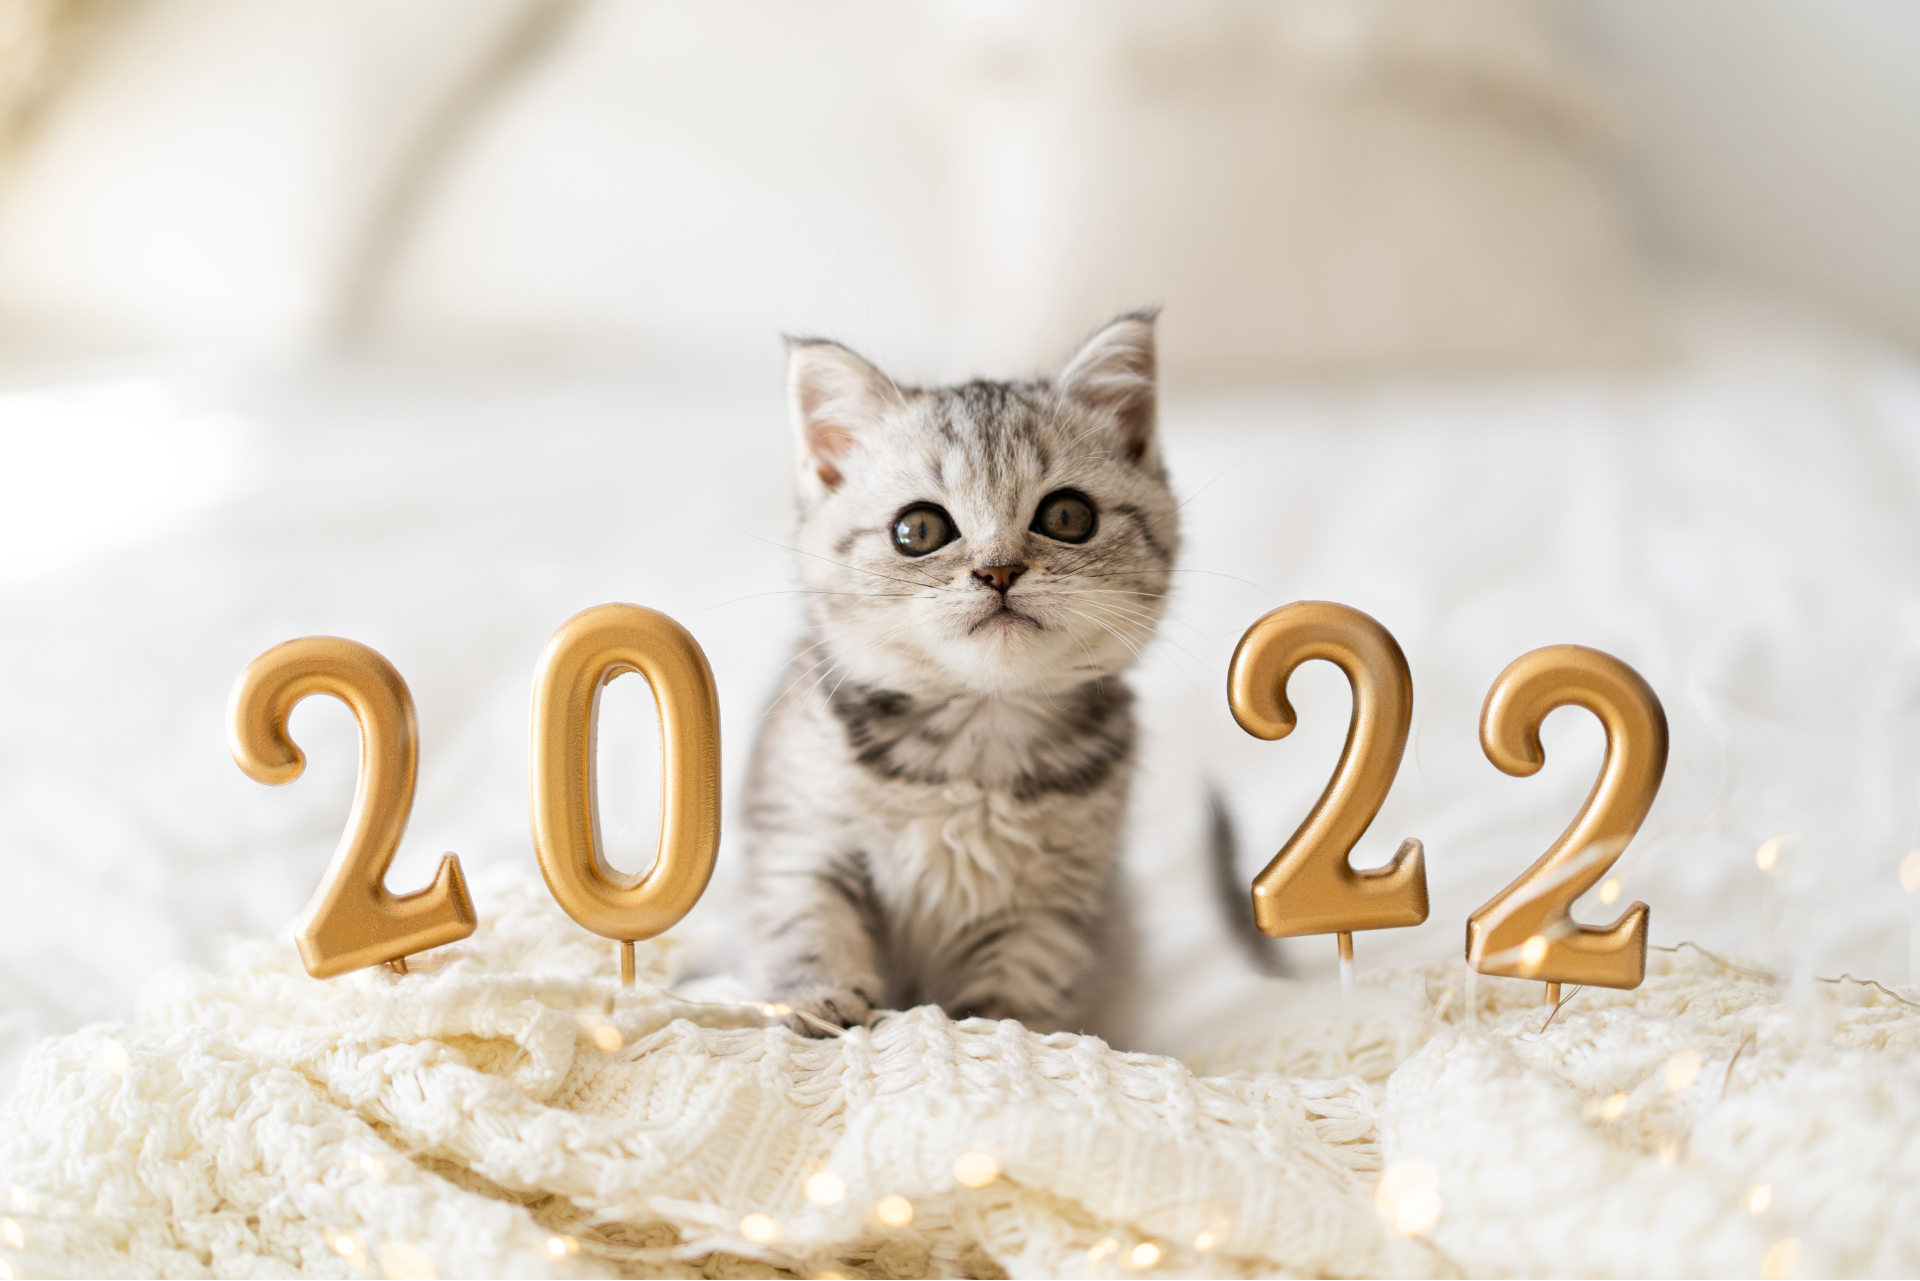 4 Good New Year's Resolutions for Cat Parents